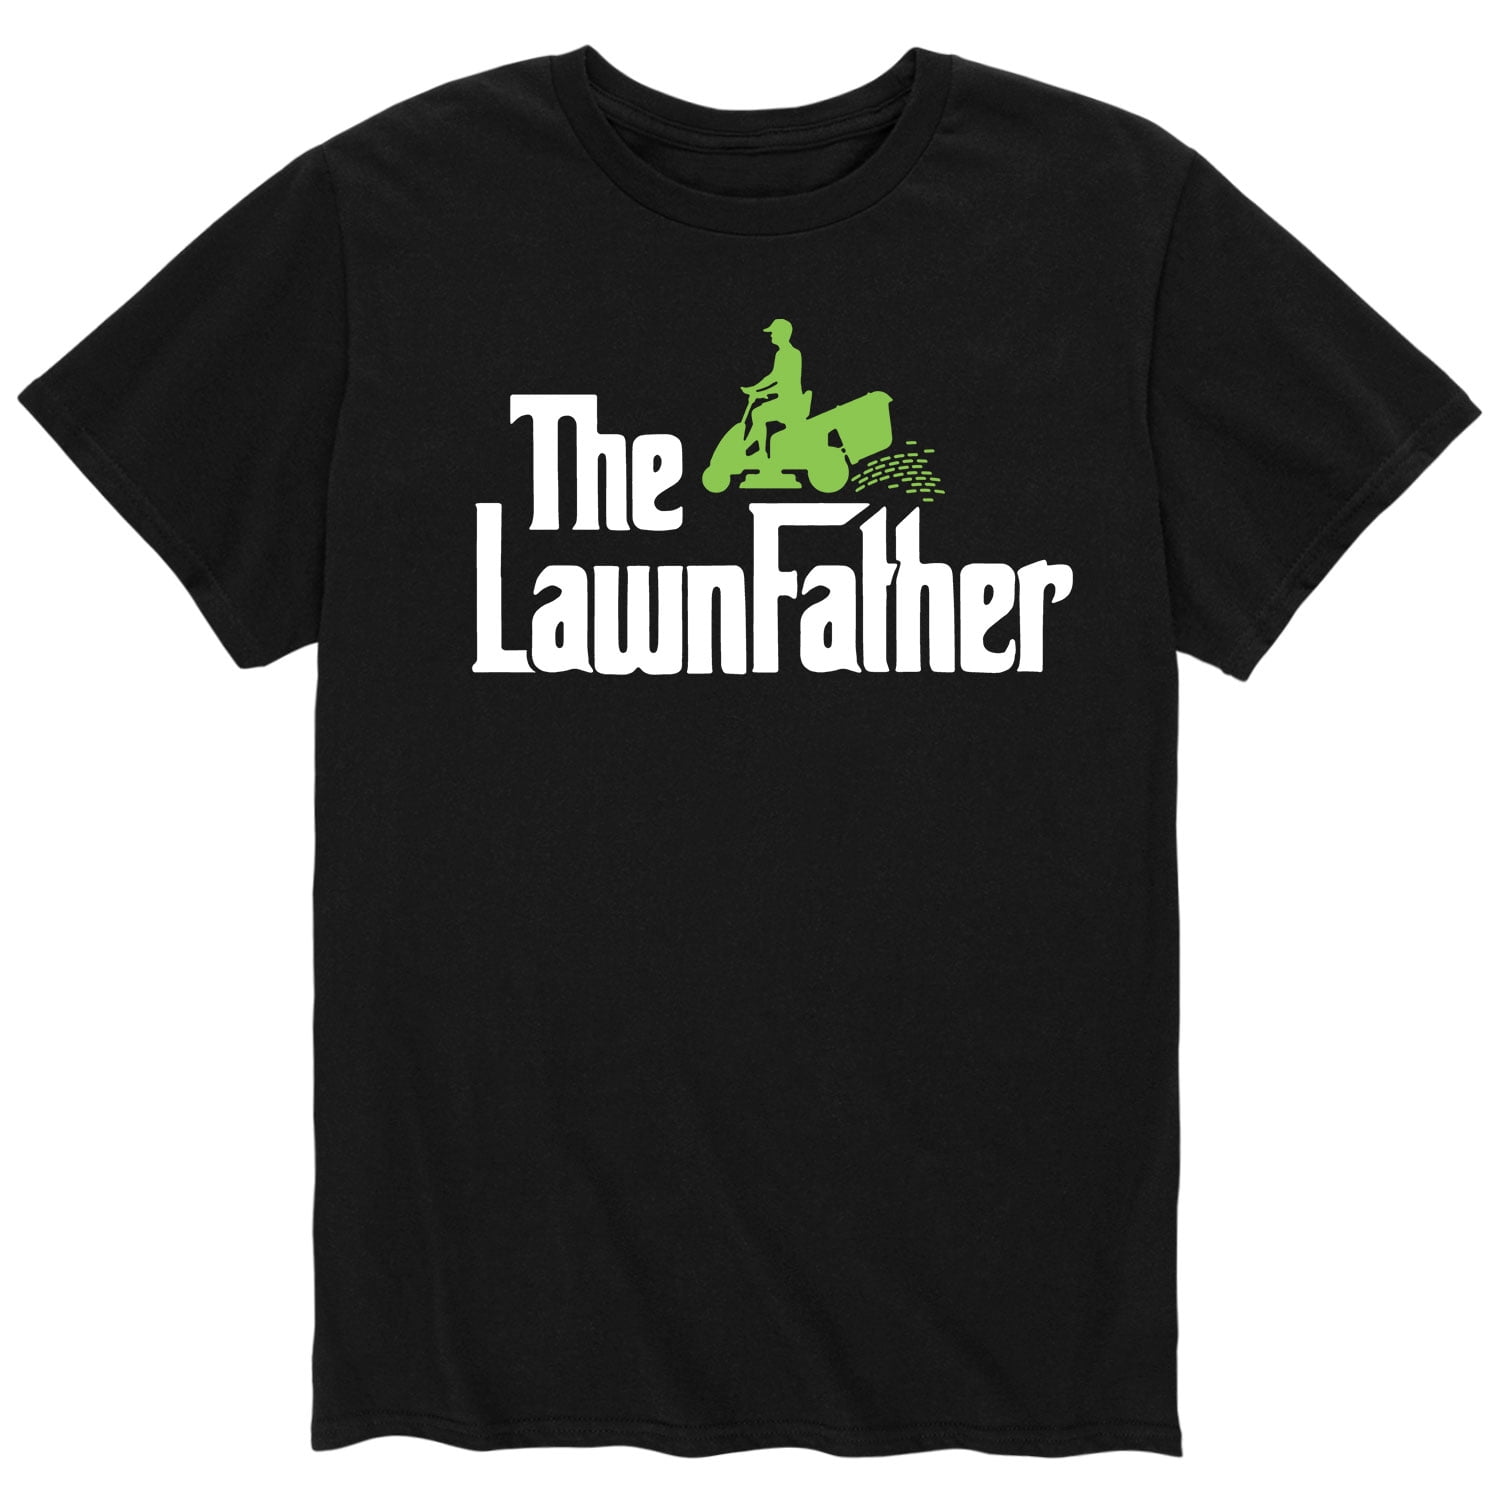 Instant Message - The Lawn Father - Men's Short Sleeve Graphic T-Shirt ...